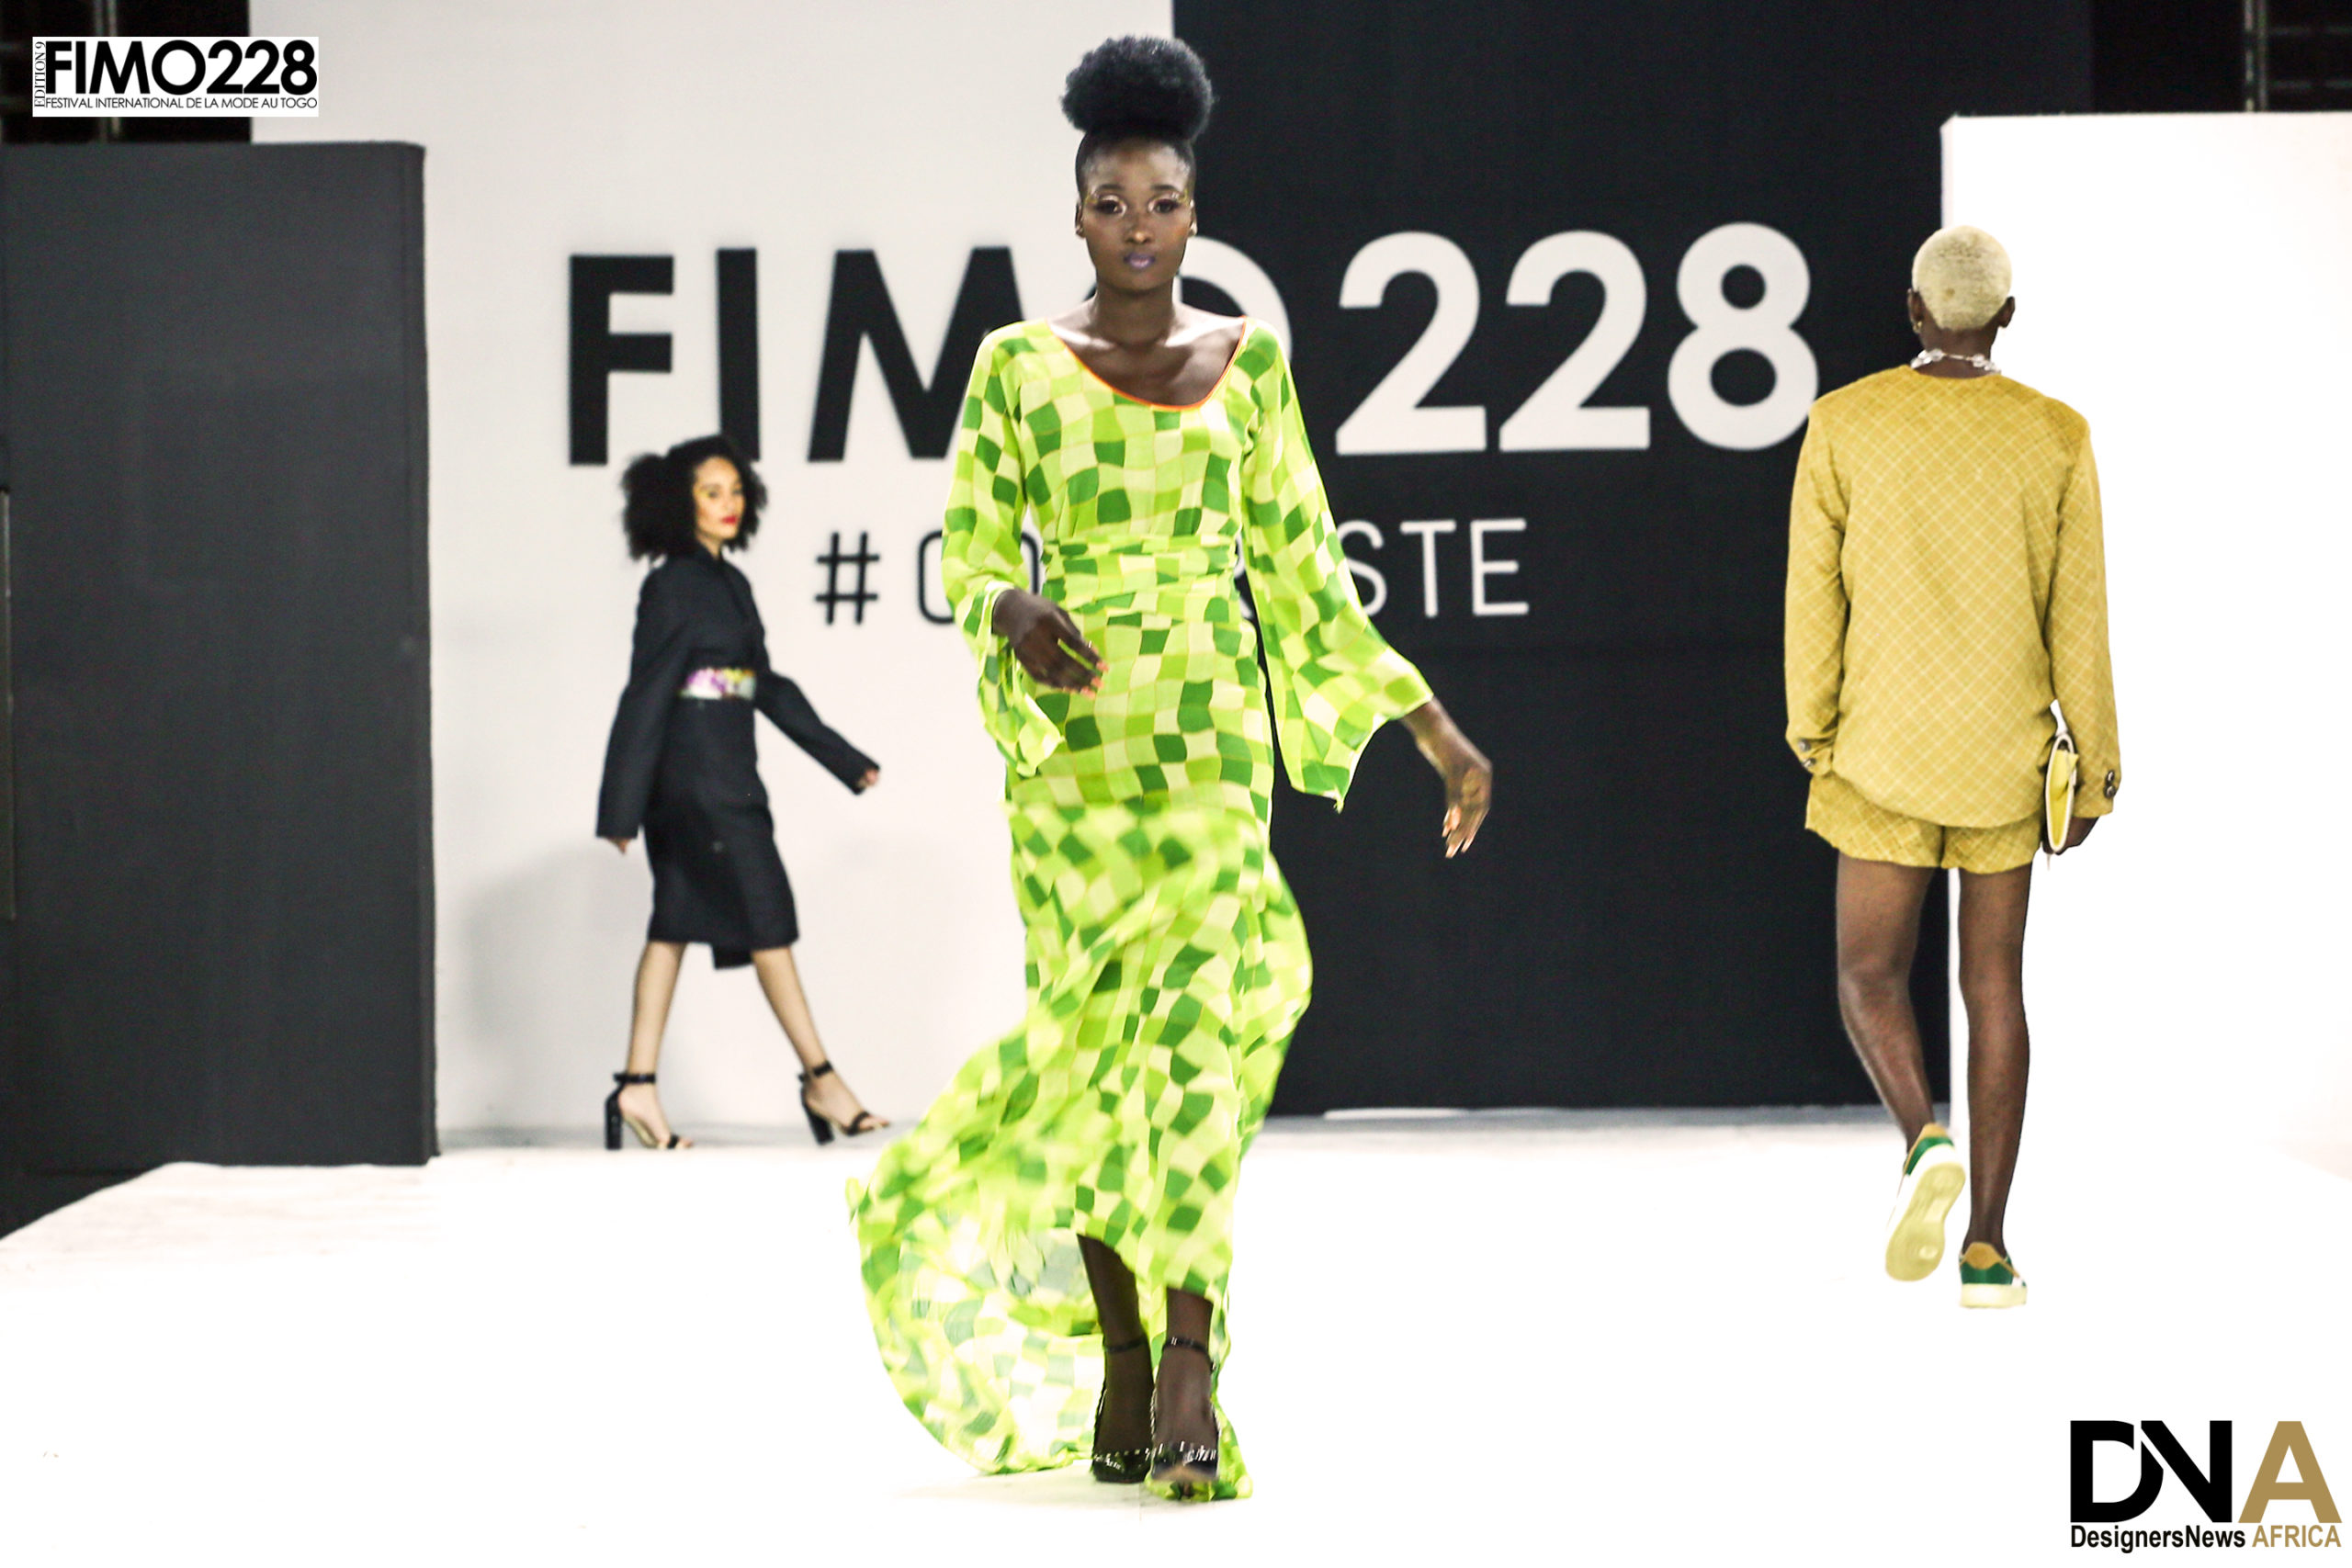 BEST AFRICAN FASHION MAGAZINE-FIMO-228-EDITION-9-2022-DEFILE-CLASSIQUE-DESIGNER-THE-MAN-Michelle-Ange-NACTO-DN-AFRICA-DNA-INTERNATIONAL-MEDIA-PARTNER-MD0A0291